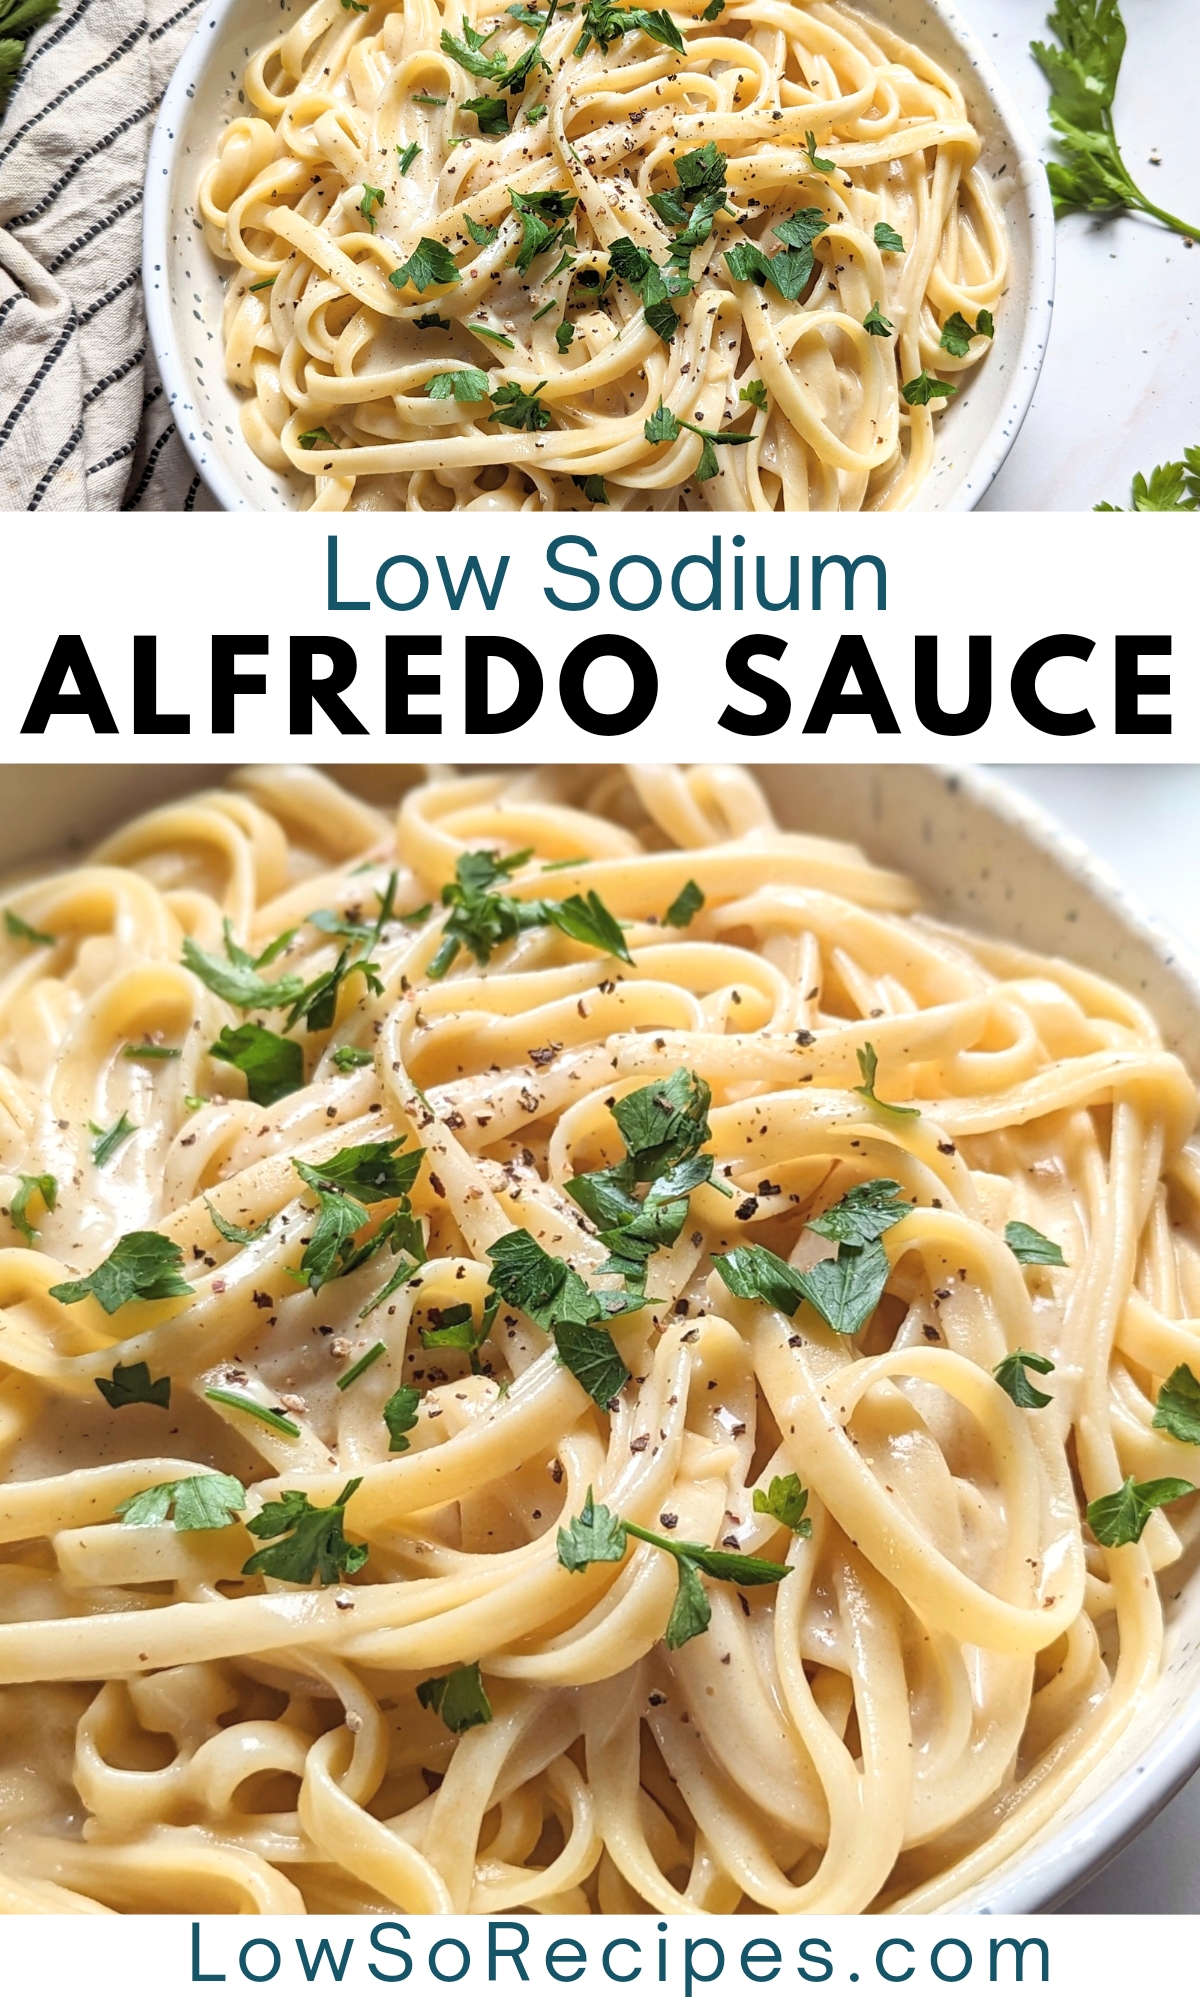 low sodium alfredo sauce recipe with milk and a little parmesan cheese garlic and olive oil